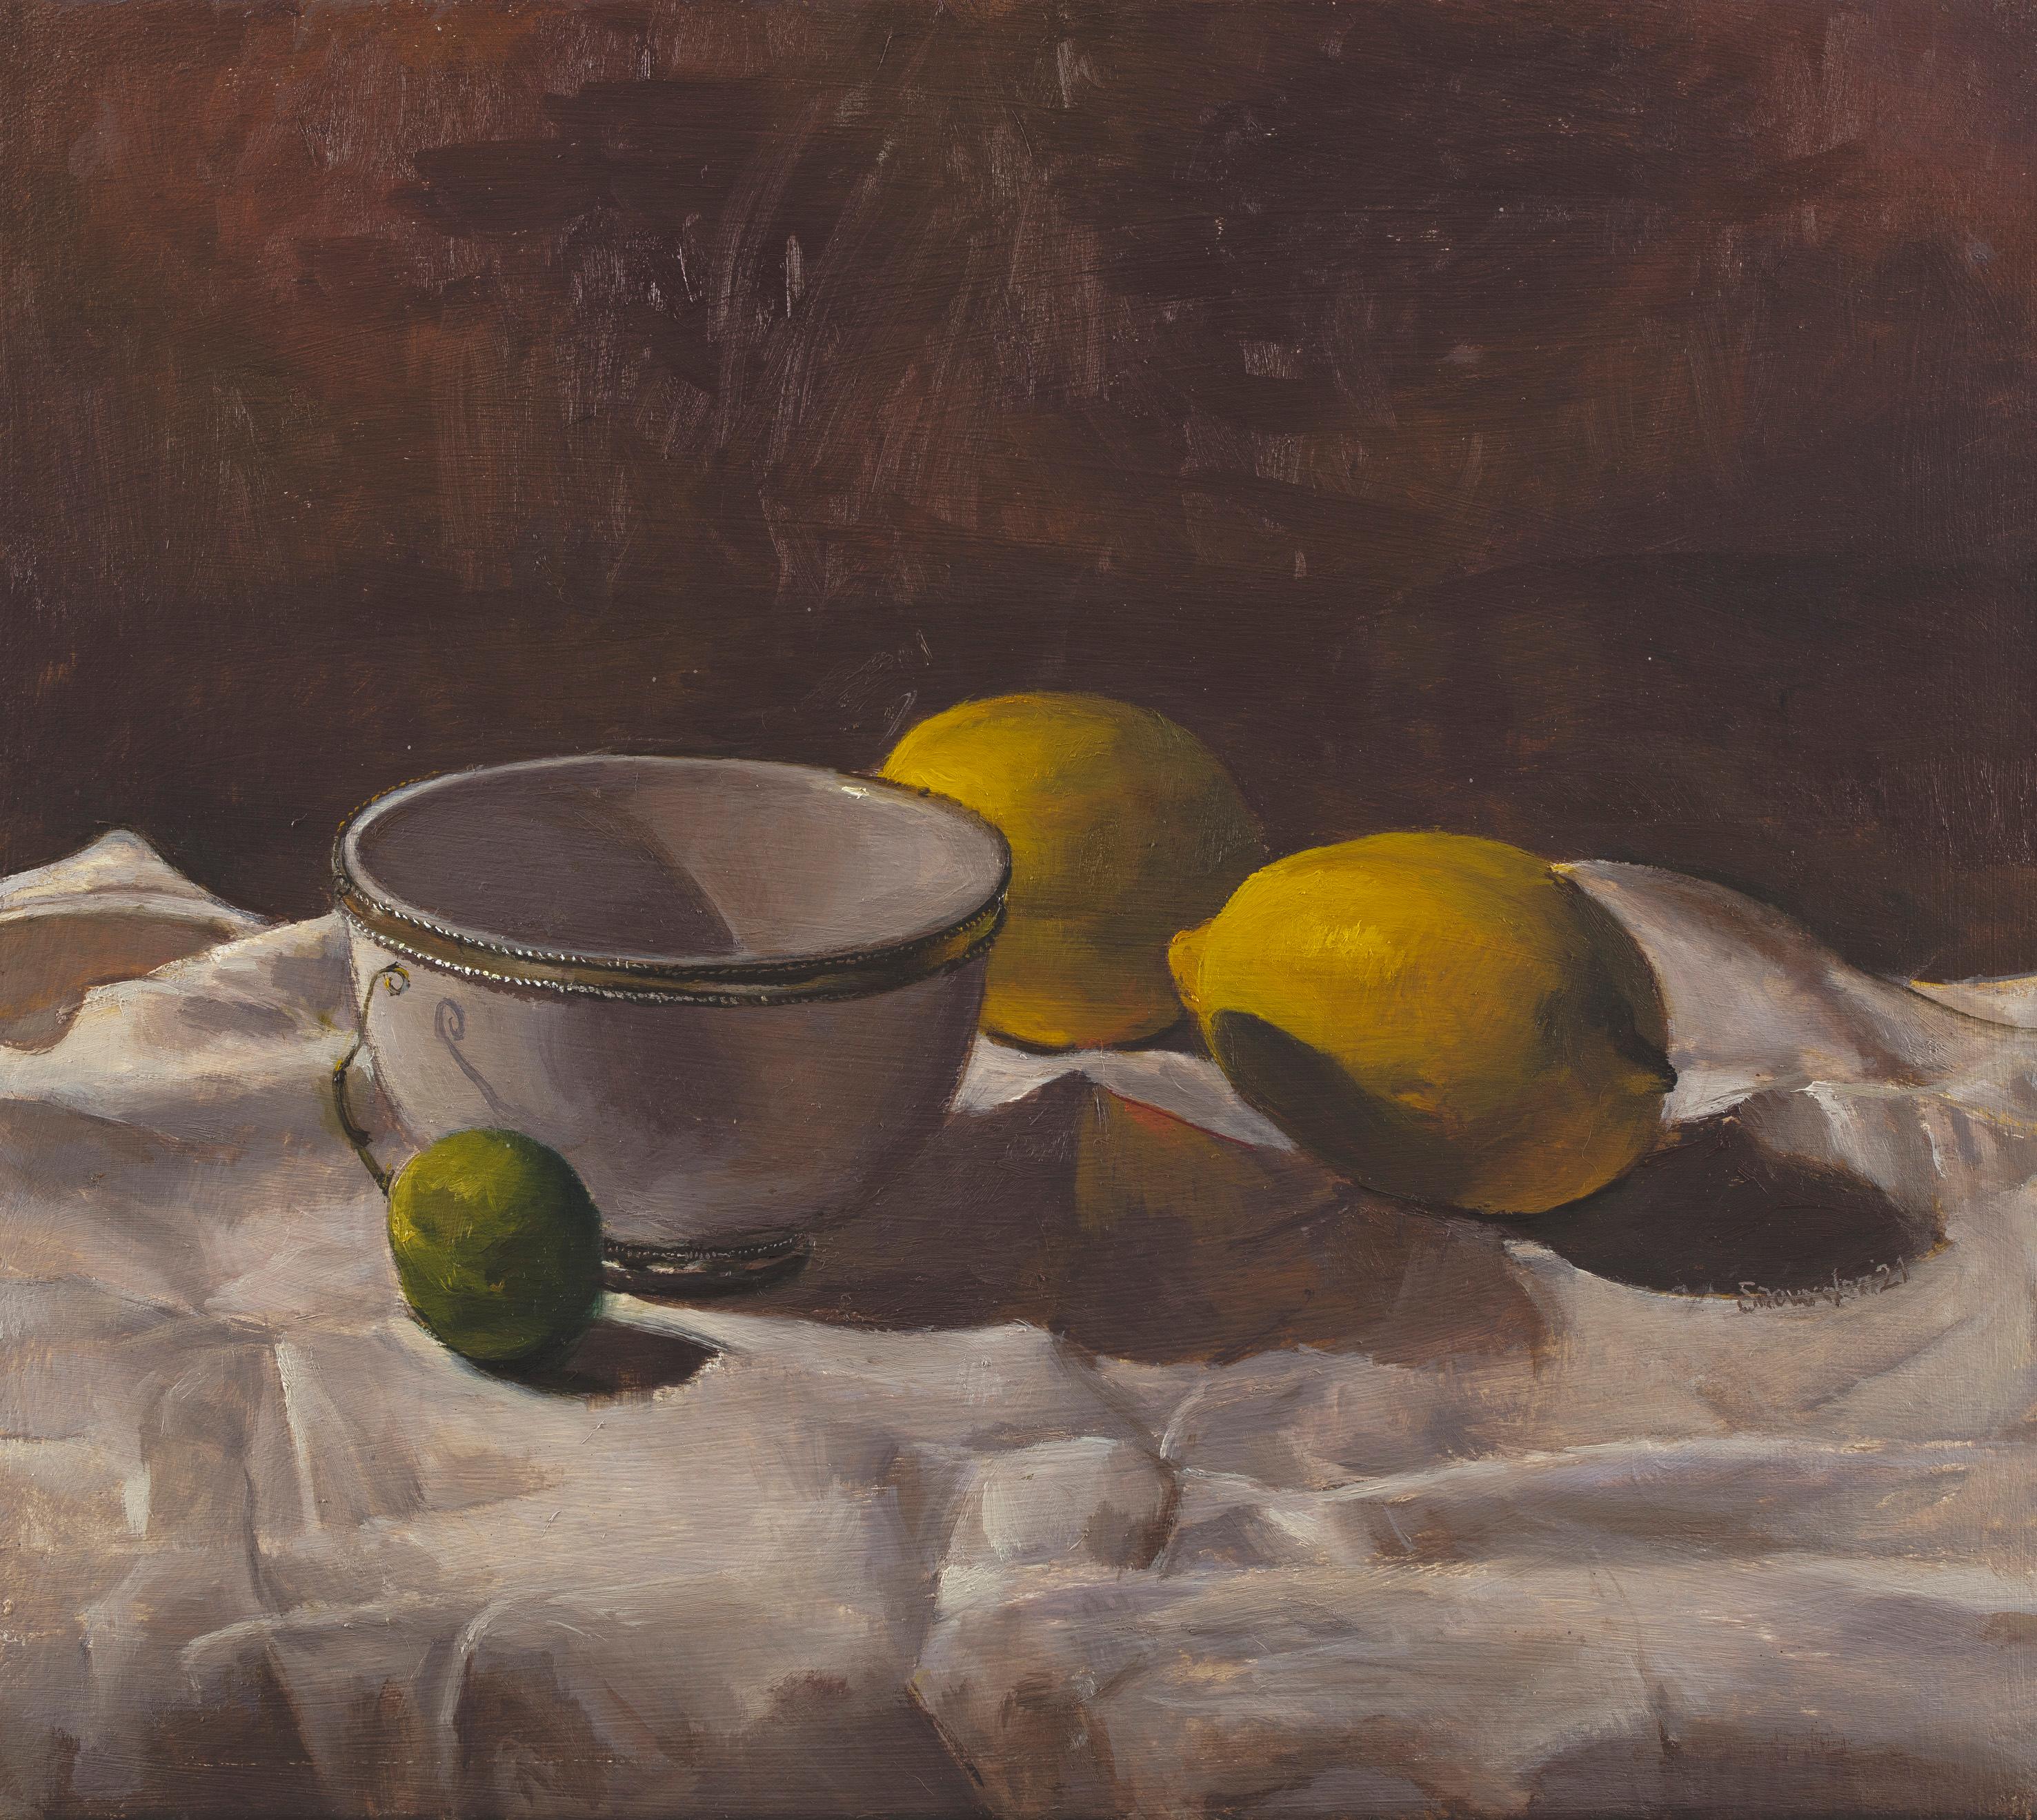 Original artwork by Tim Snowdon
Lemons with bowl and lime, oil on linen, 35.5cm x 40.5cm, 2021

A part of Snowdon's exhibition ‘Conversations’, this piece references the way inanimate objects ‘speak to’ each other within still life compositions and